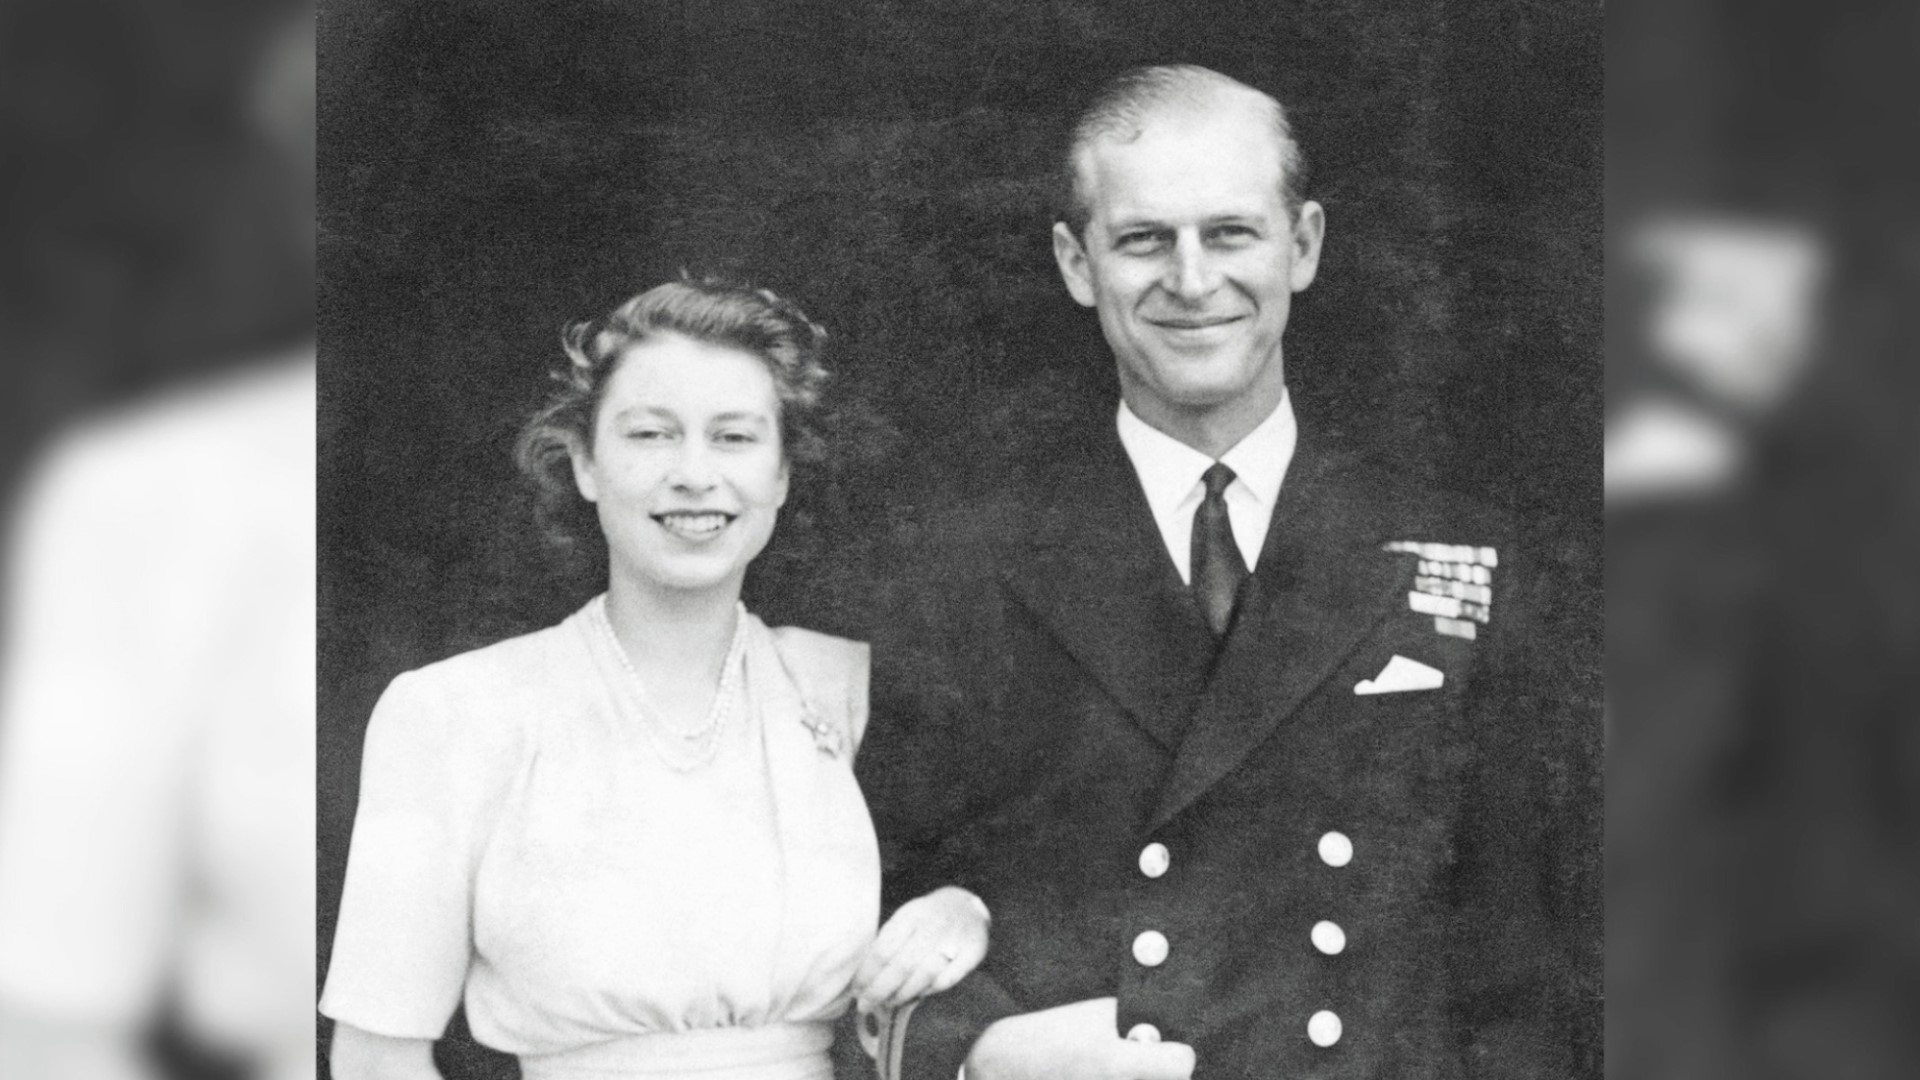 The longest love story of any British sovereign came to a close today, as Prince Philip passed at age 99. Veuer's Chloe Hurst has the story!